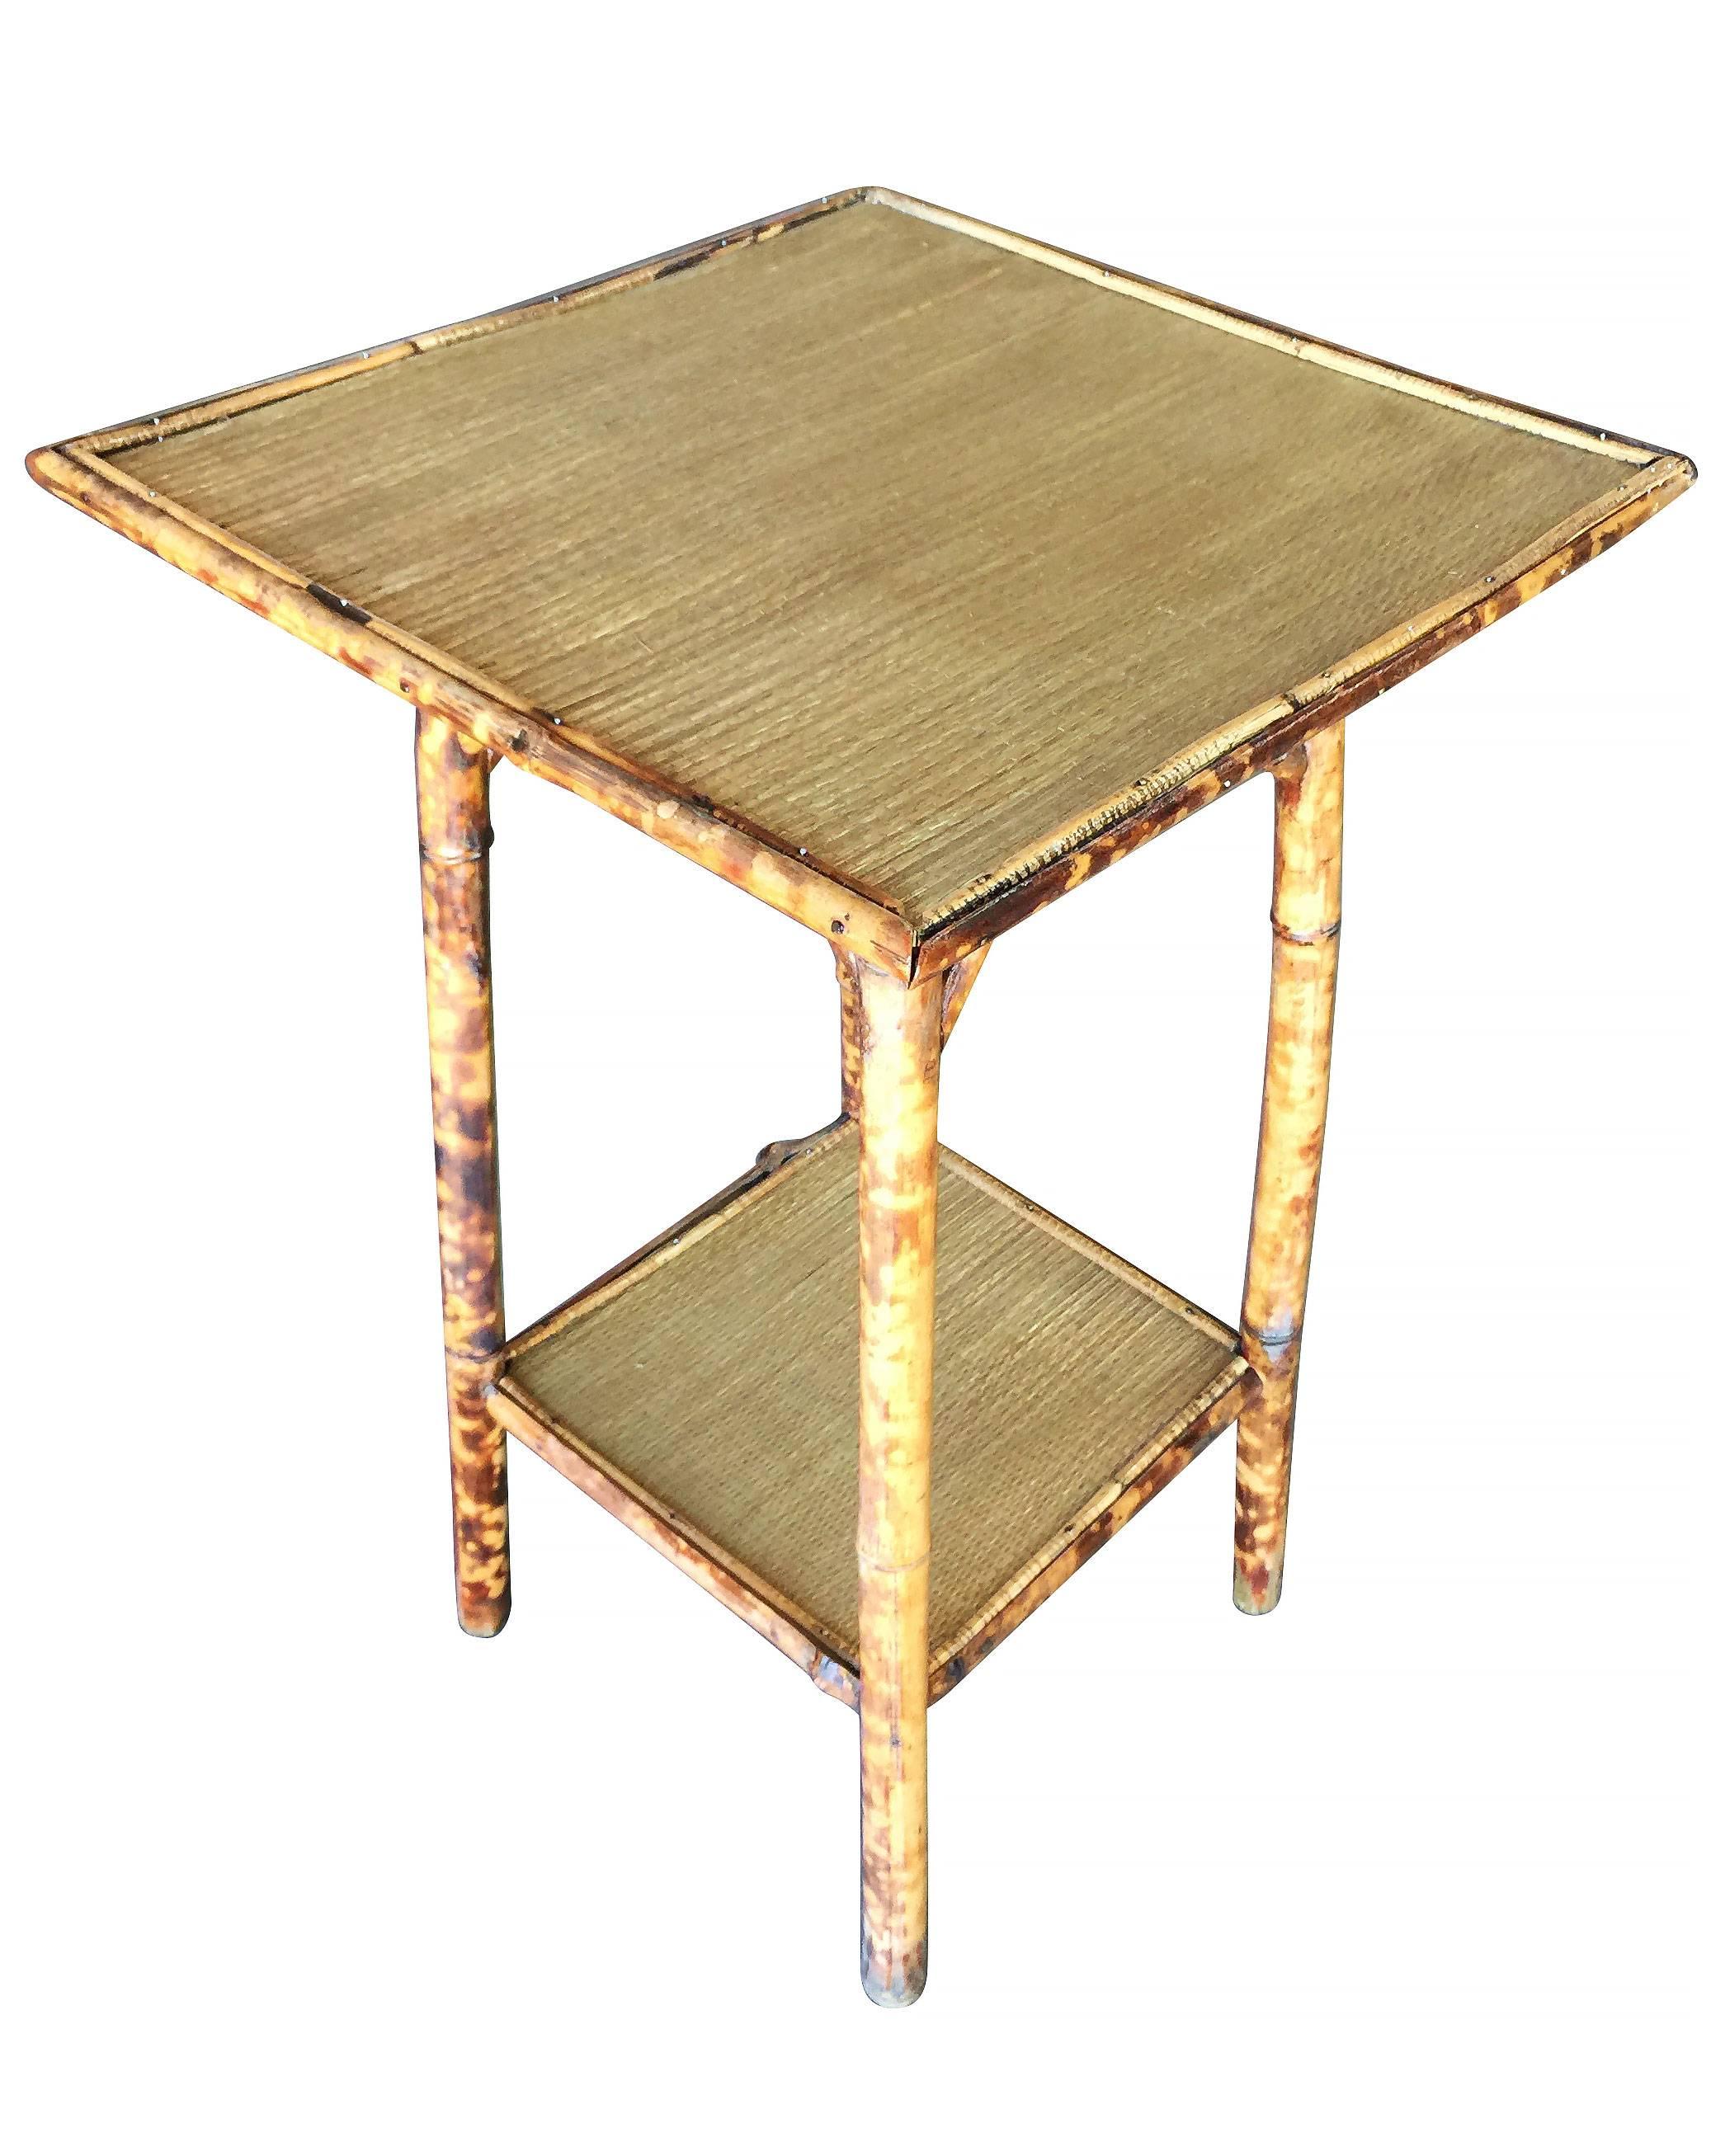 Antique tiger bamboo pedestal side table with slat bamboo top and secondary bottom shelf.


Restored to new for you.

All rattan, bamboo and wicker furniture has been painstakingly refurbished to the highest standards with the best materials. All